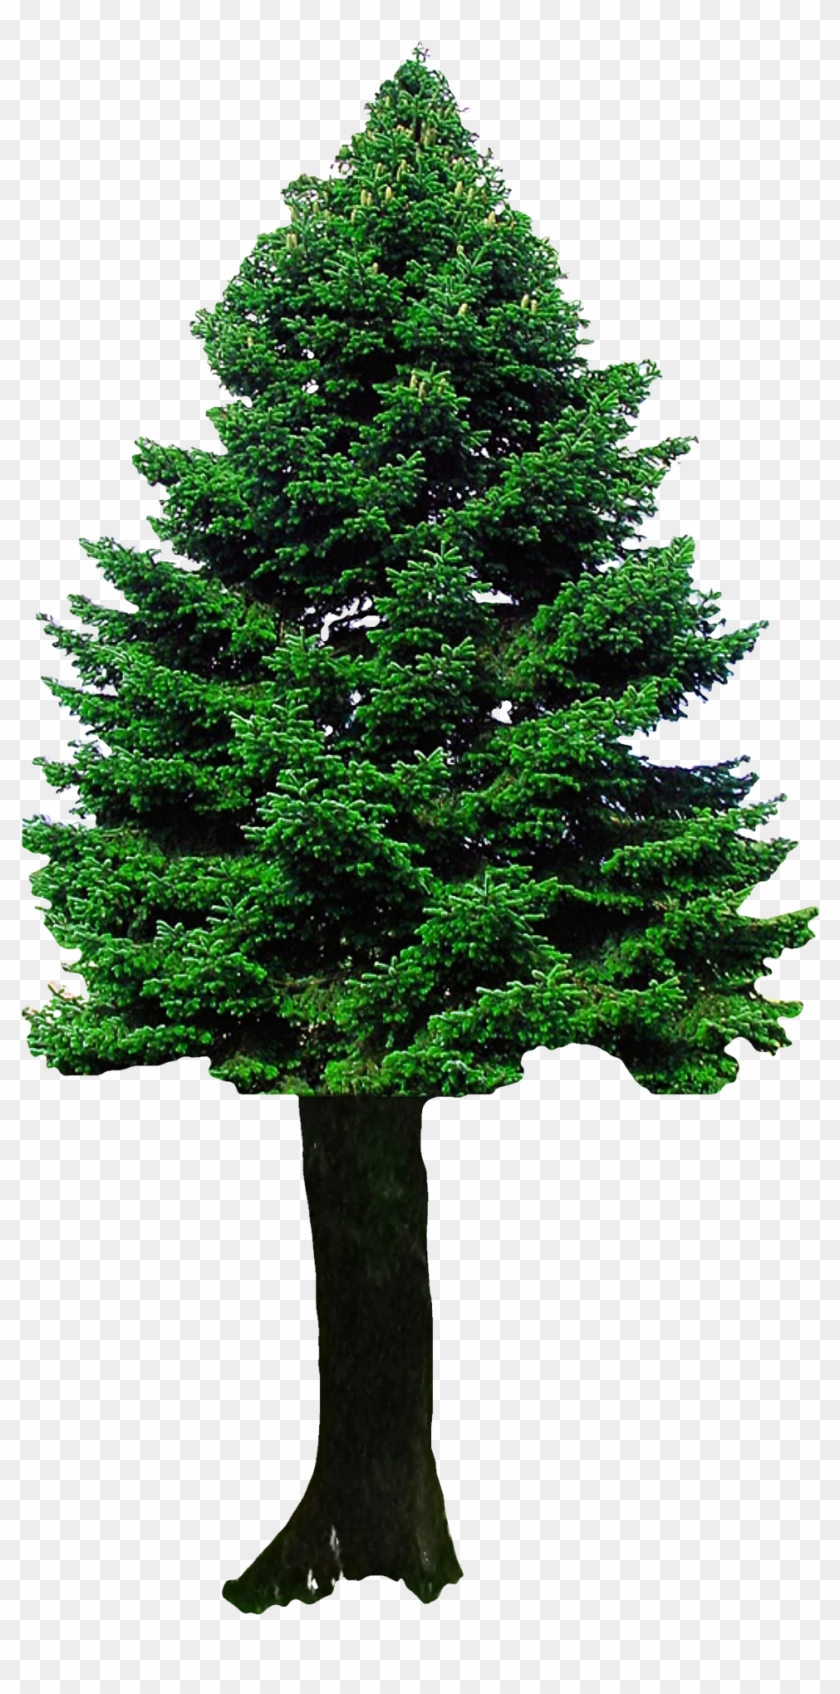 Christmas Tree Png Transparent Image - Png Images Of Tree #901824